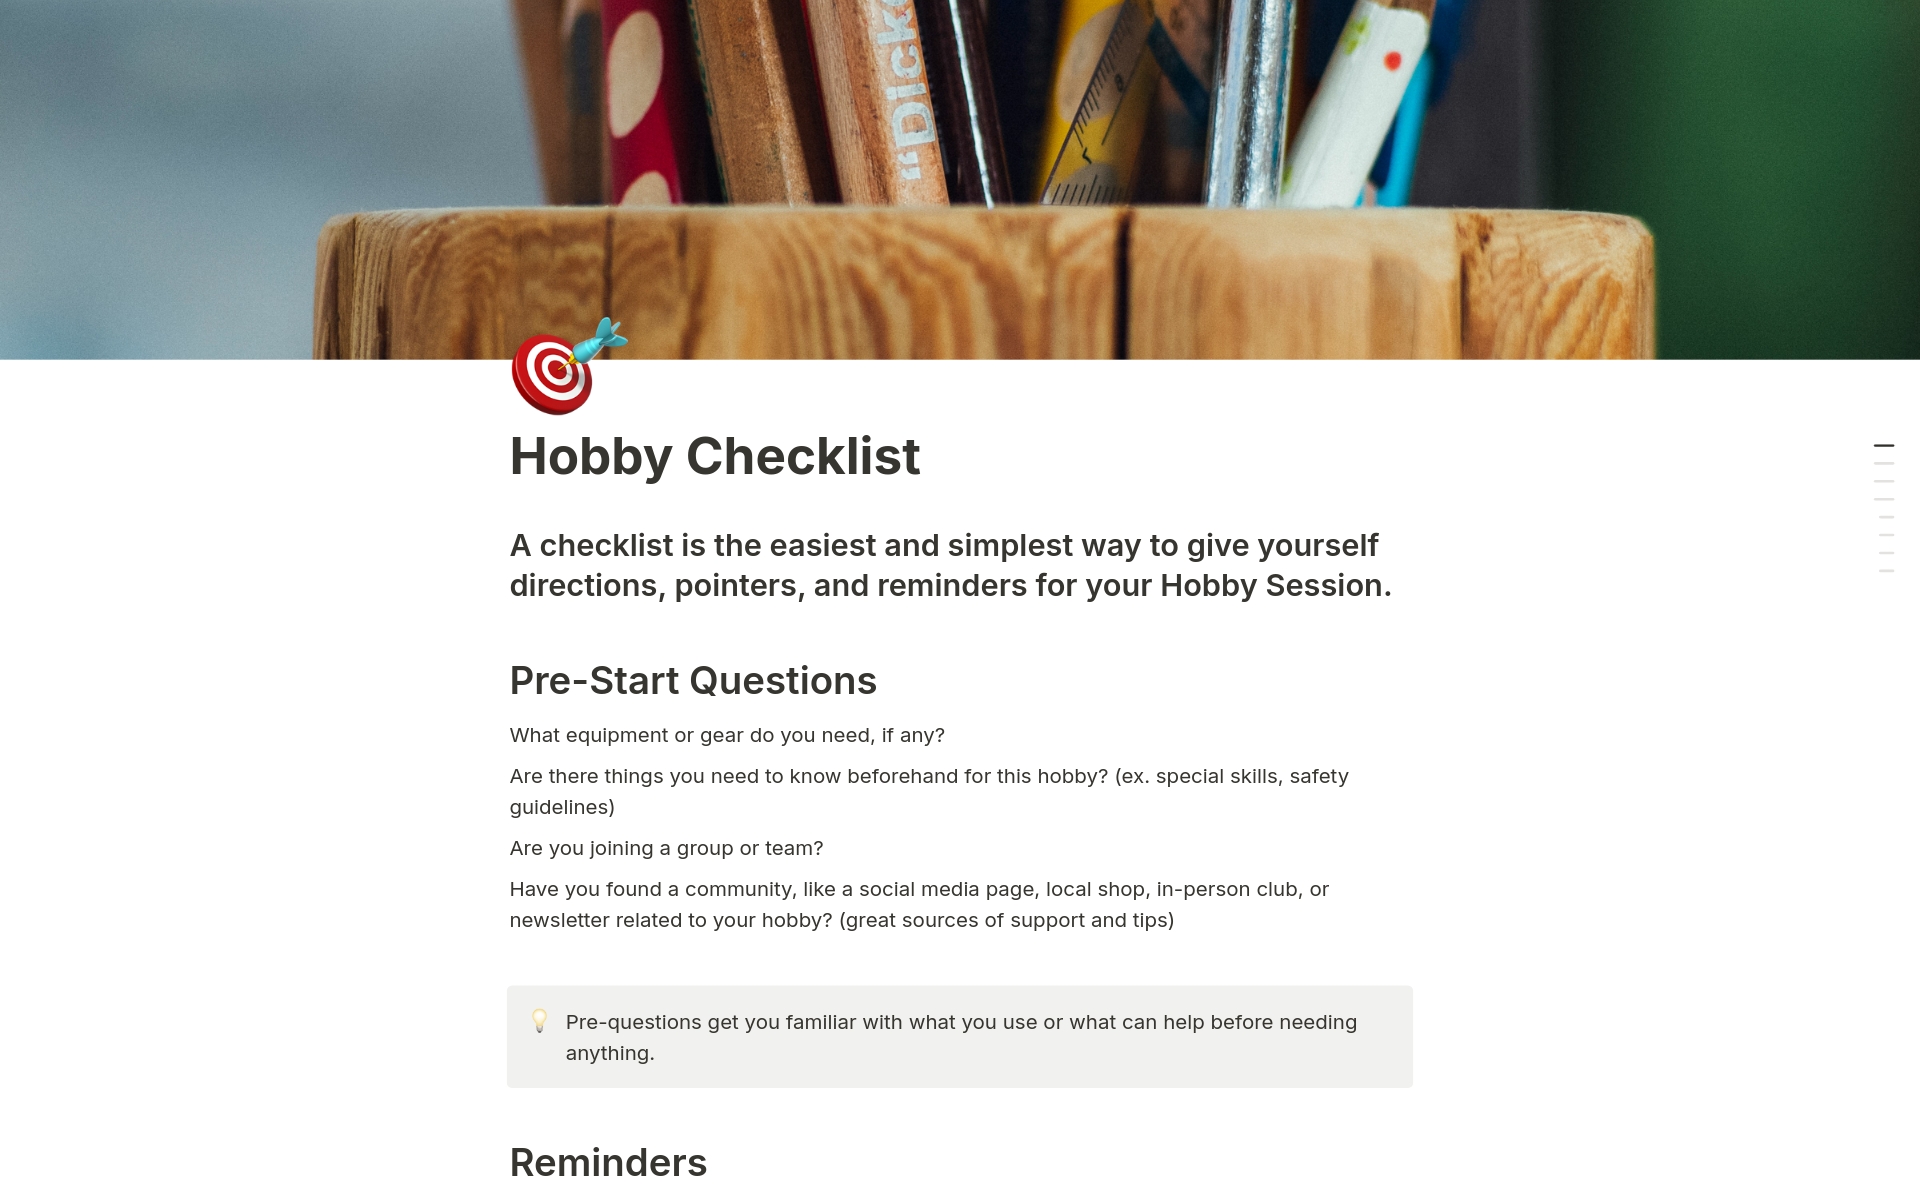 This checklist helps you prepare for your hobby journal and allows you to create custom checklists. You can customize a list for tools, gear, books, and more to support your hobby session.